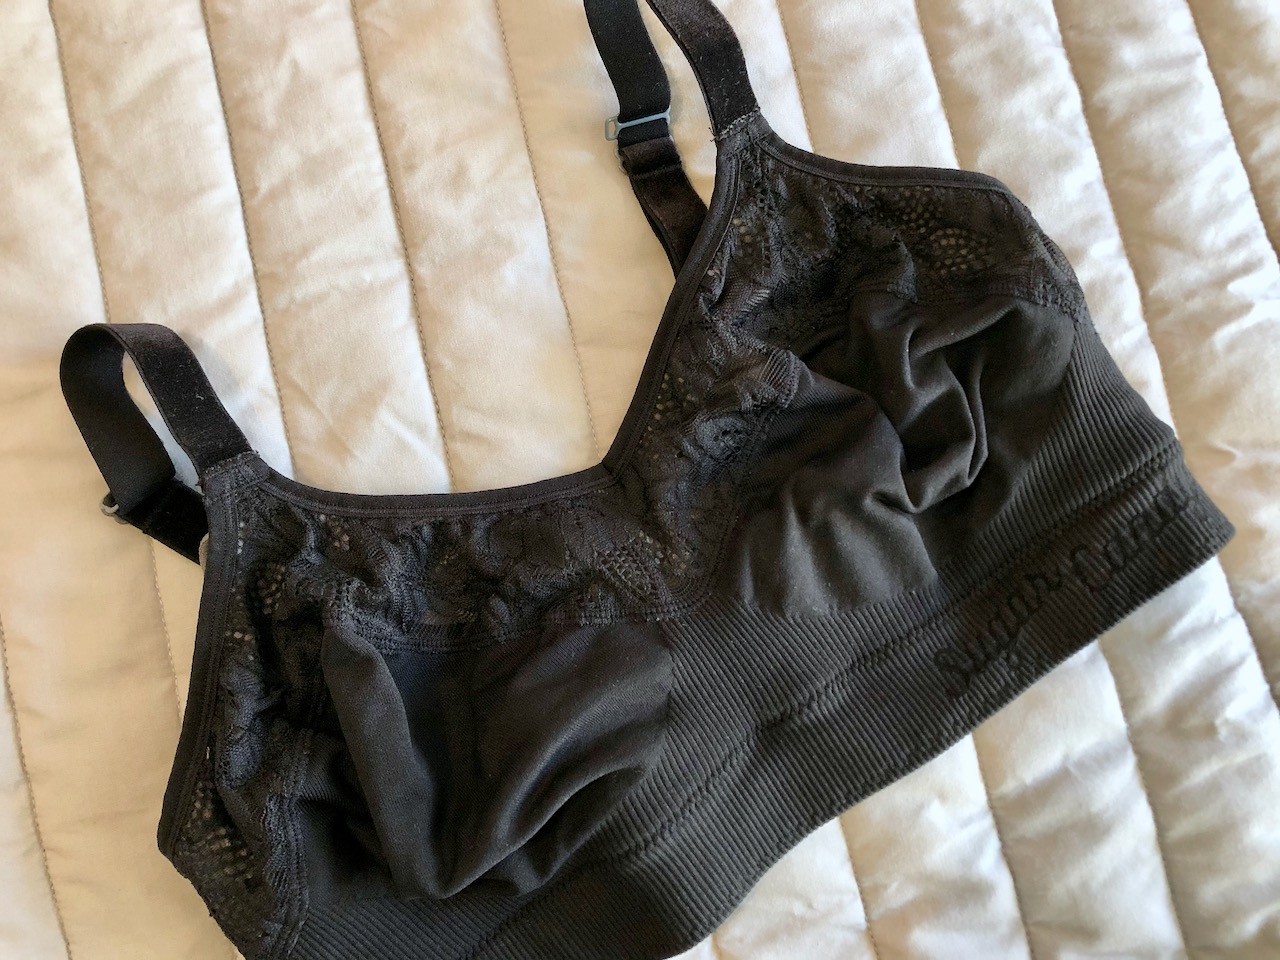 In my dreams wire free bralette – The Pencil Test